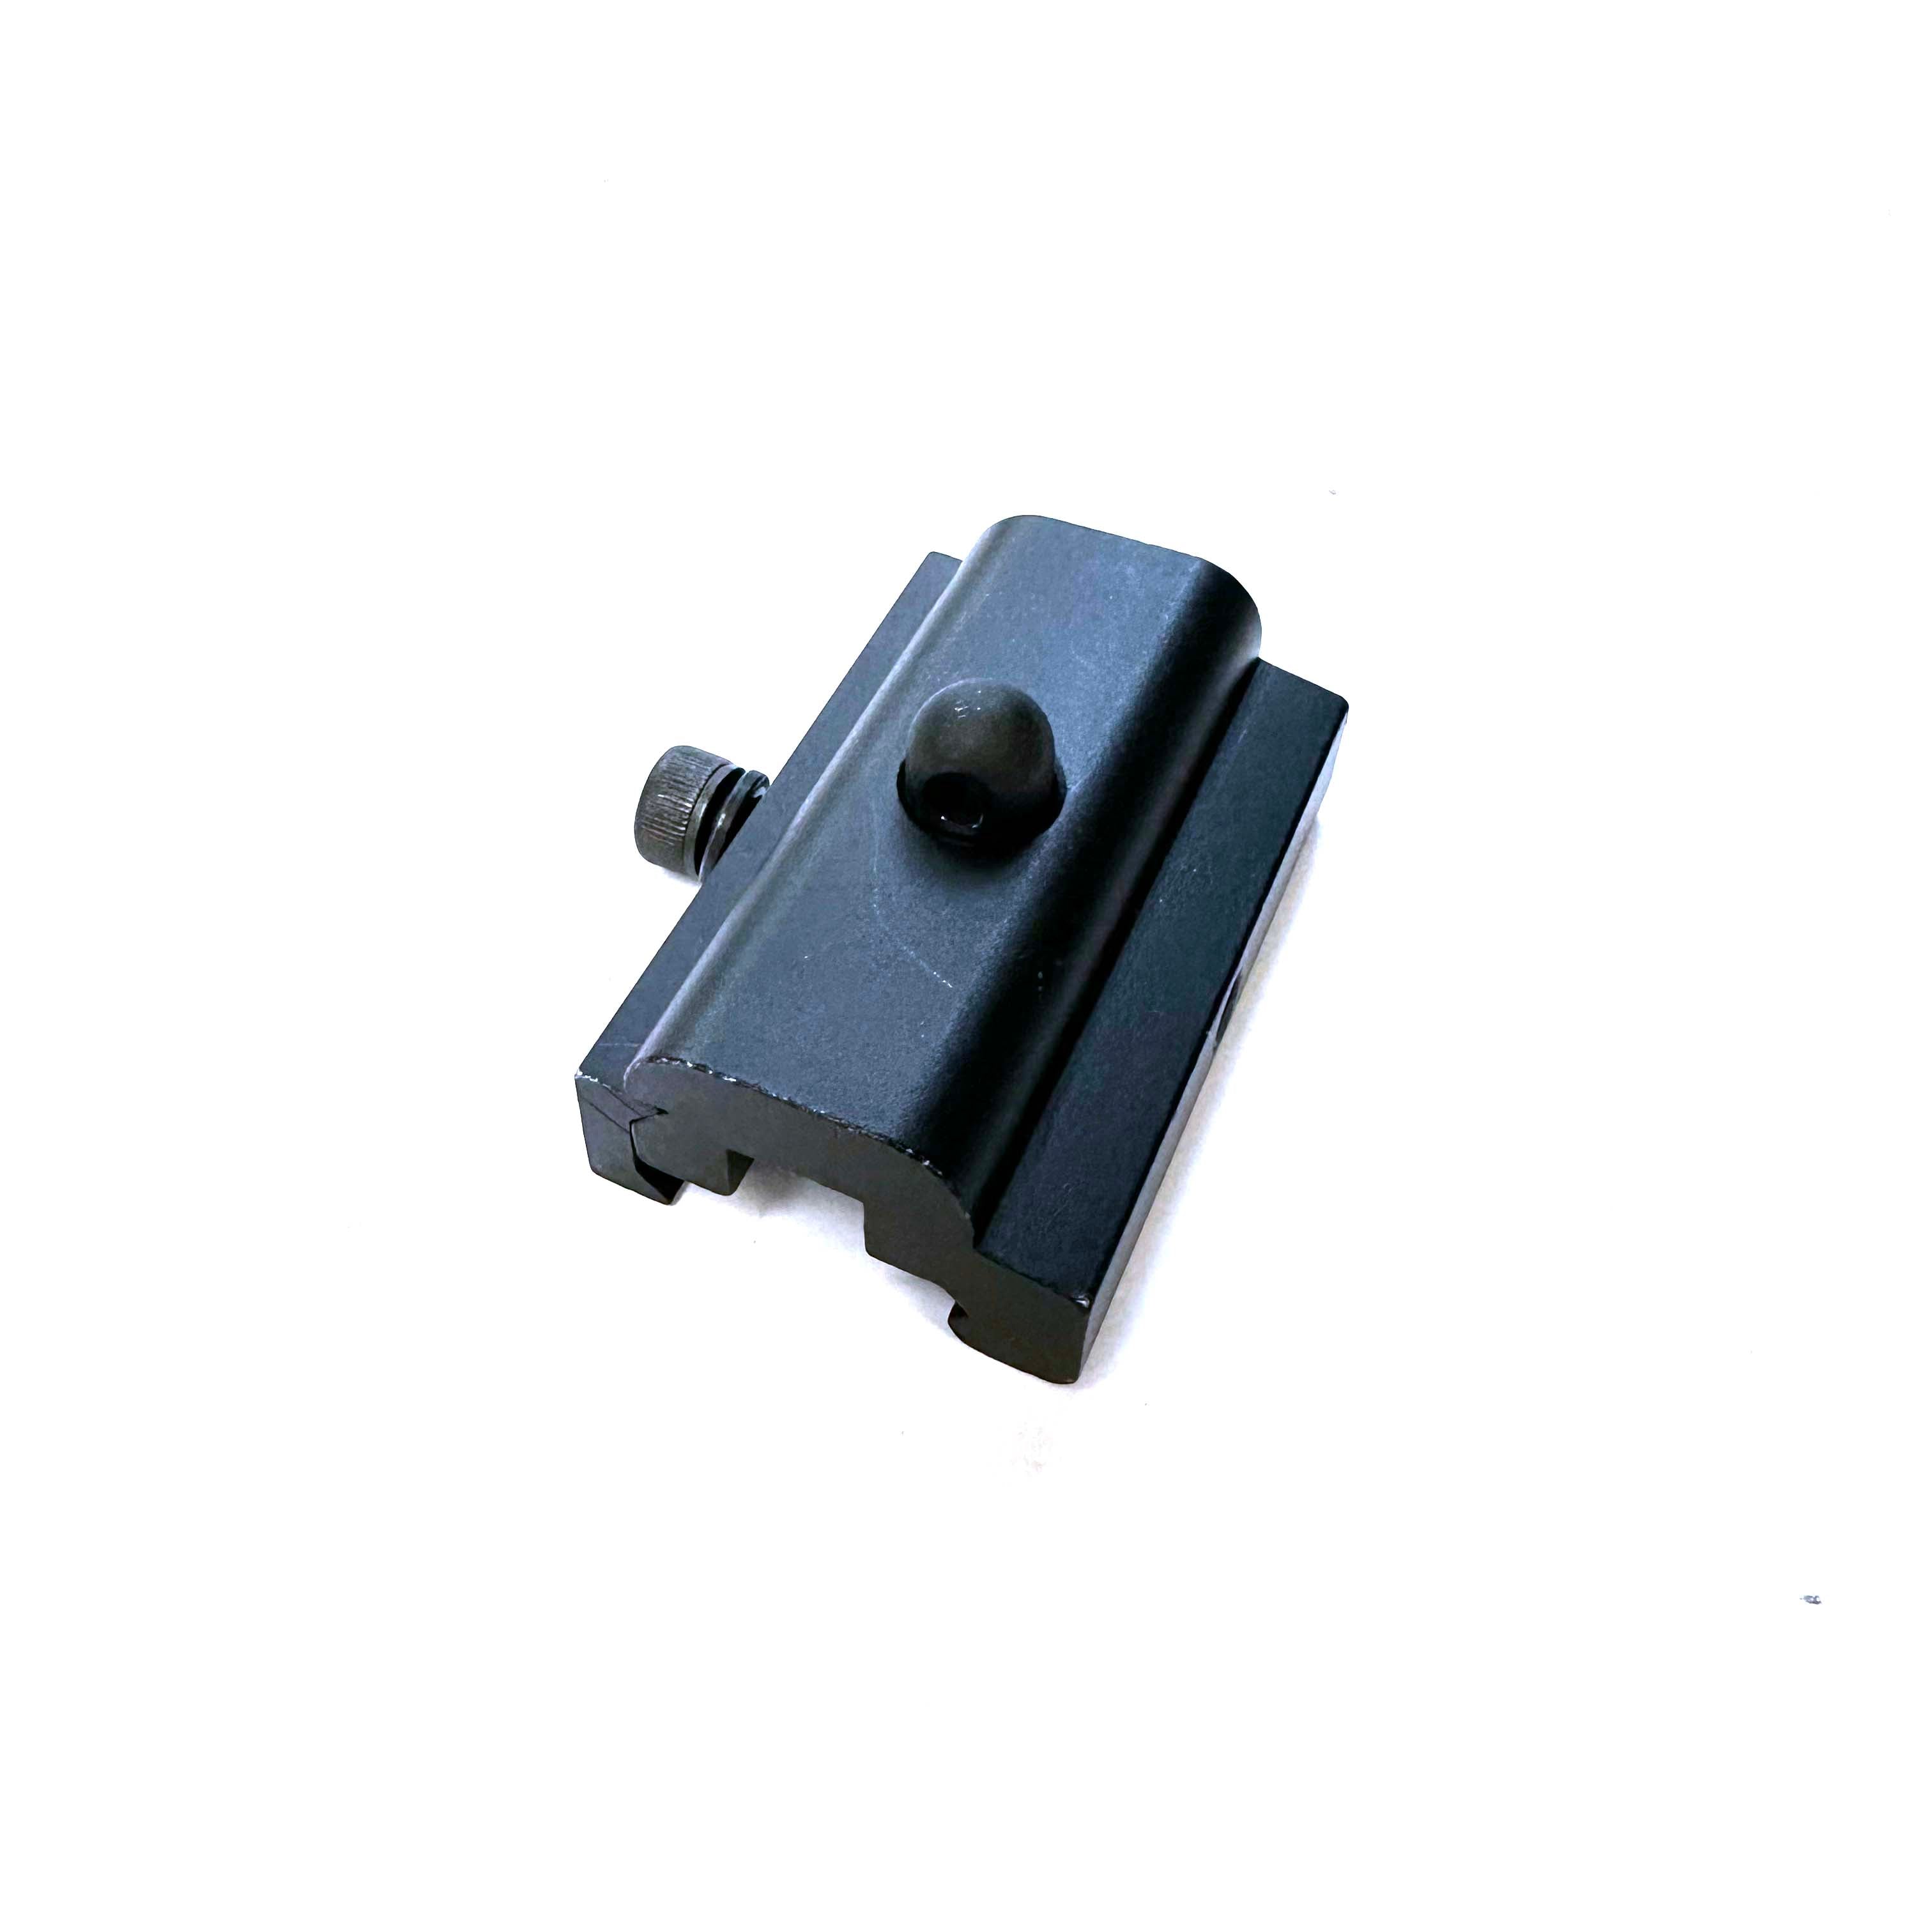 Bipod Stud Adapter to fit Picatinny Rails - NEW - RPI Supplies